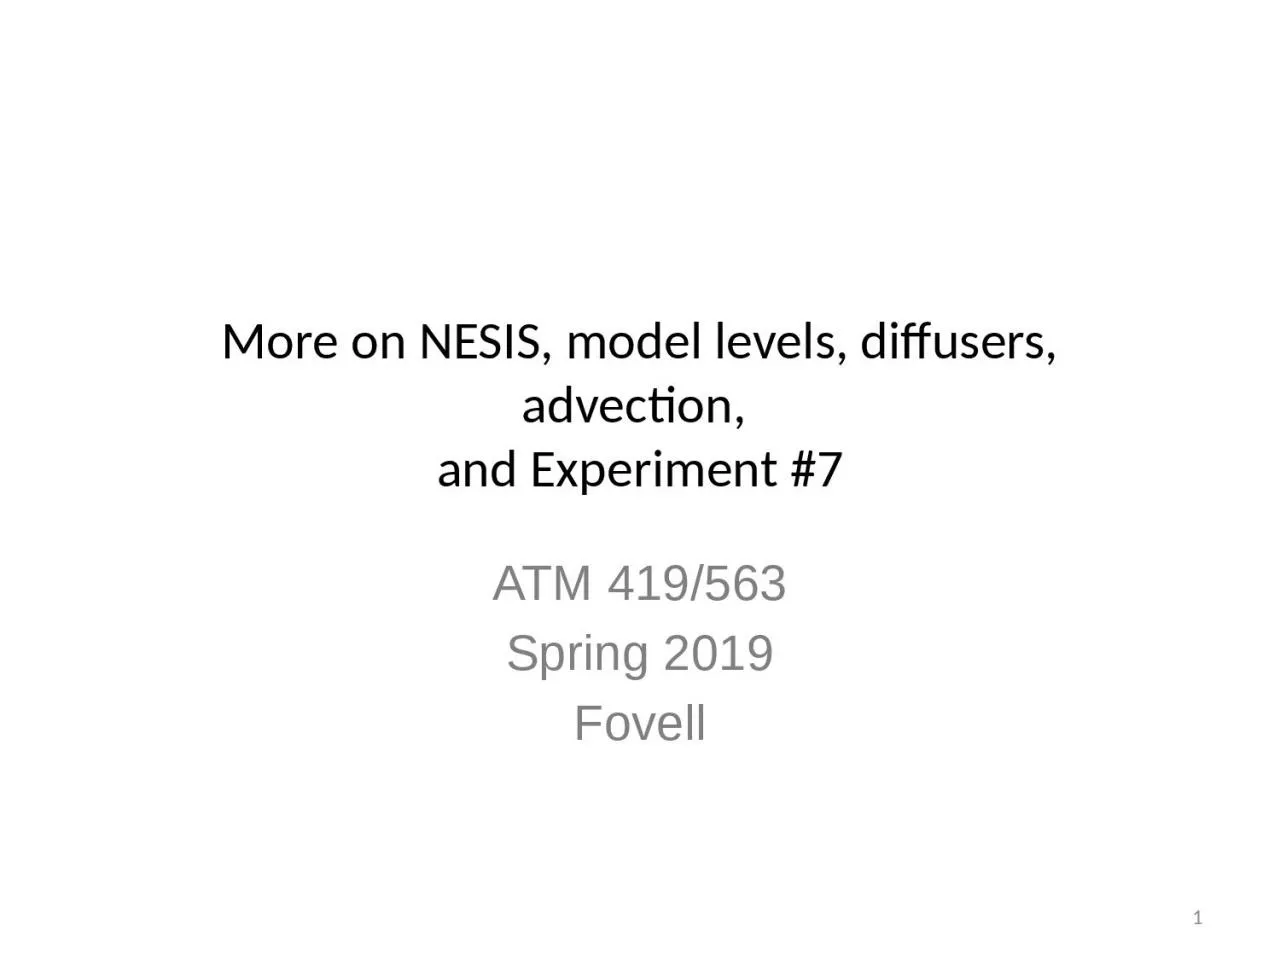 More on NESIS, model levels, diffusers, advection,